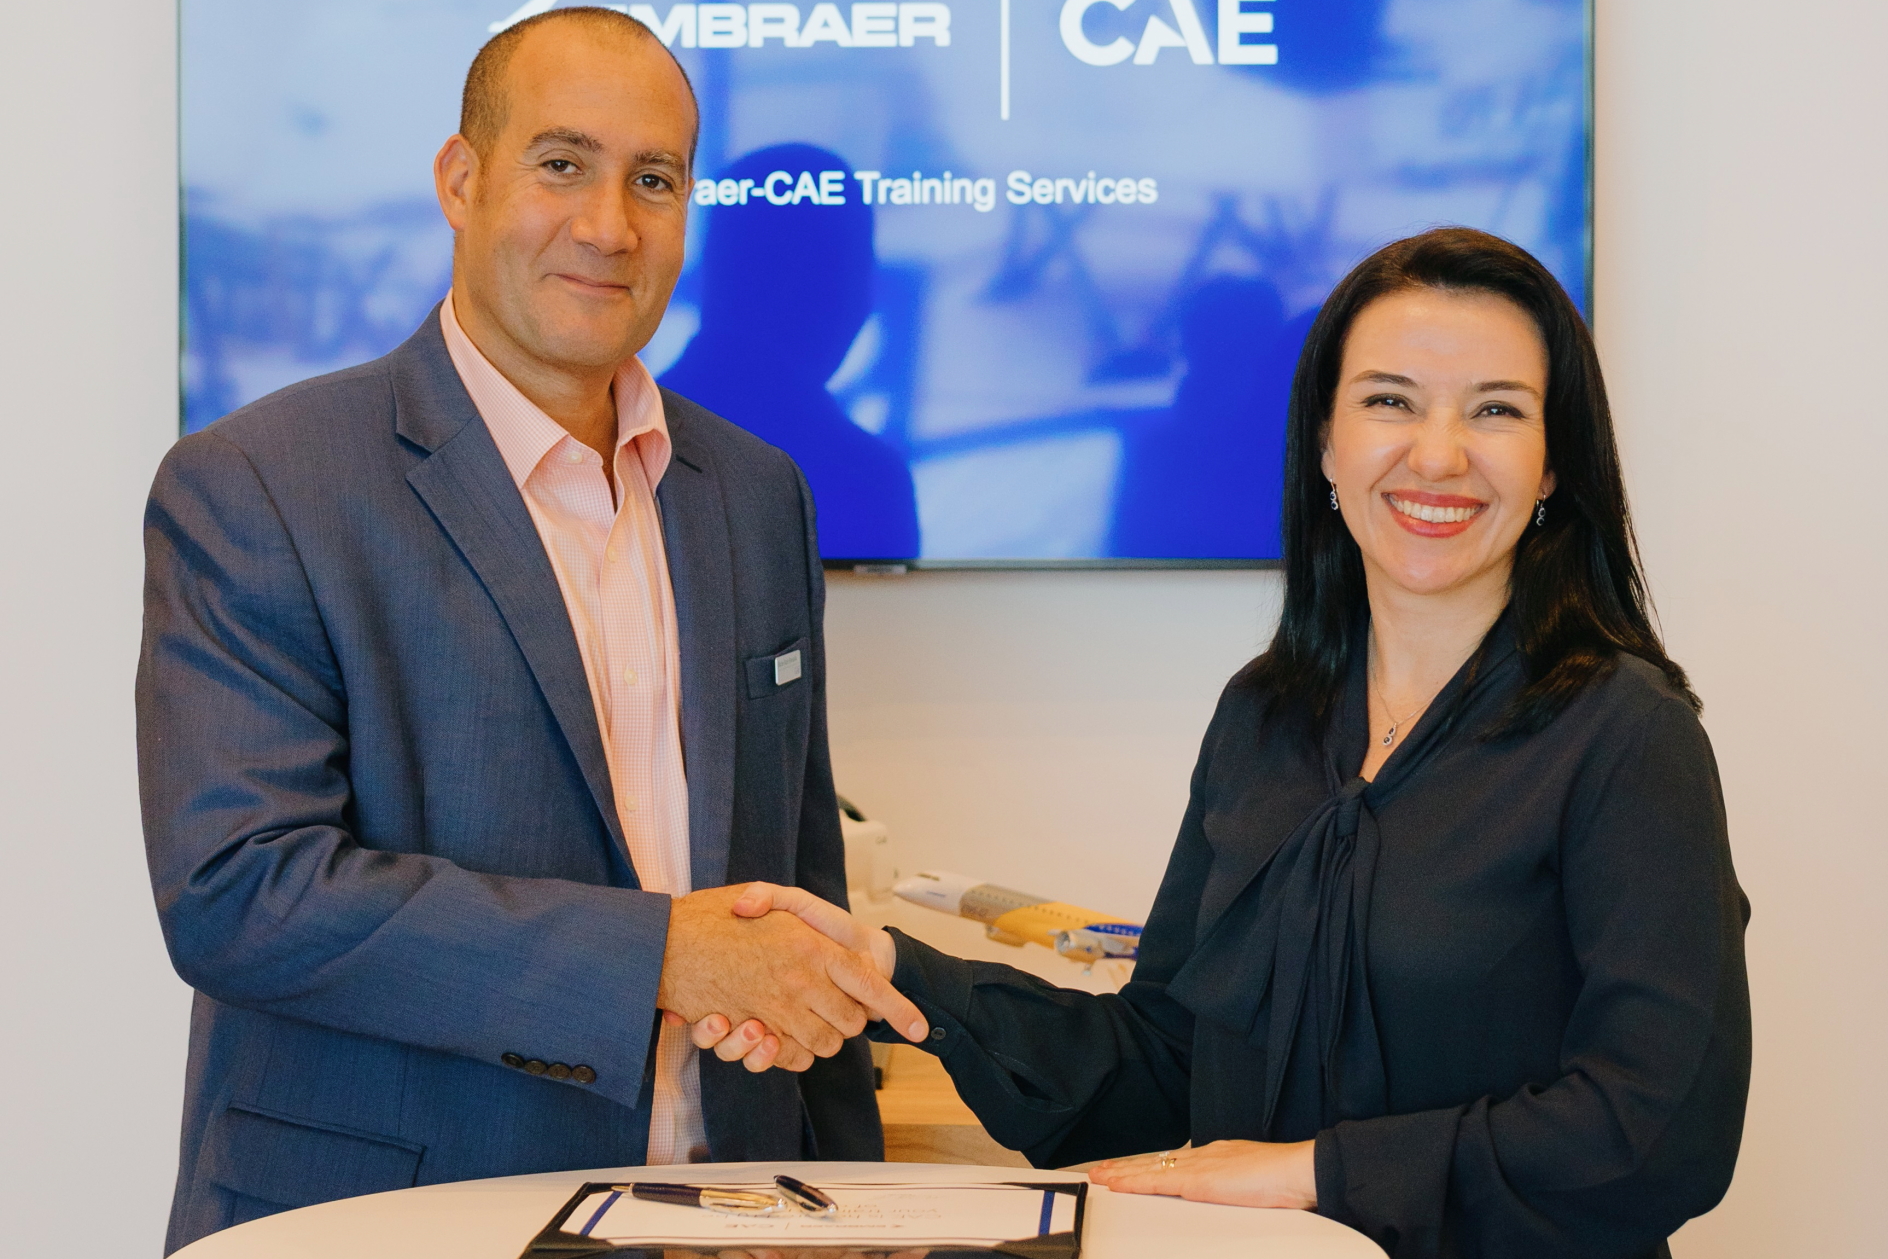 Michel Azar-Hmouda, CAE's VP Global Commercial Aviation Training (left) with Lais Port Antunes, Services & Support Director, Commercial Aviation (APAC), Embraer Services & Support. Click to enlarge.